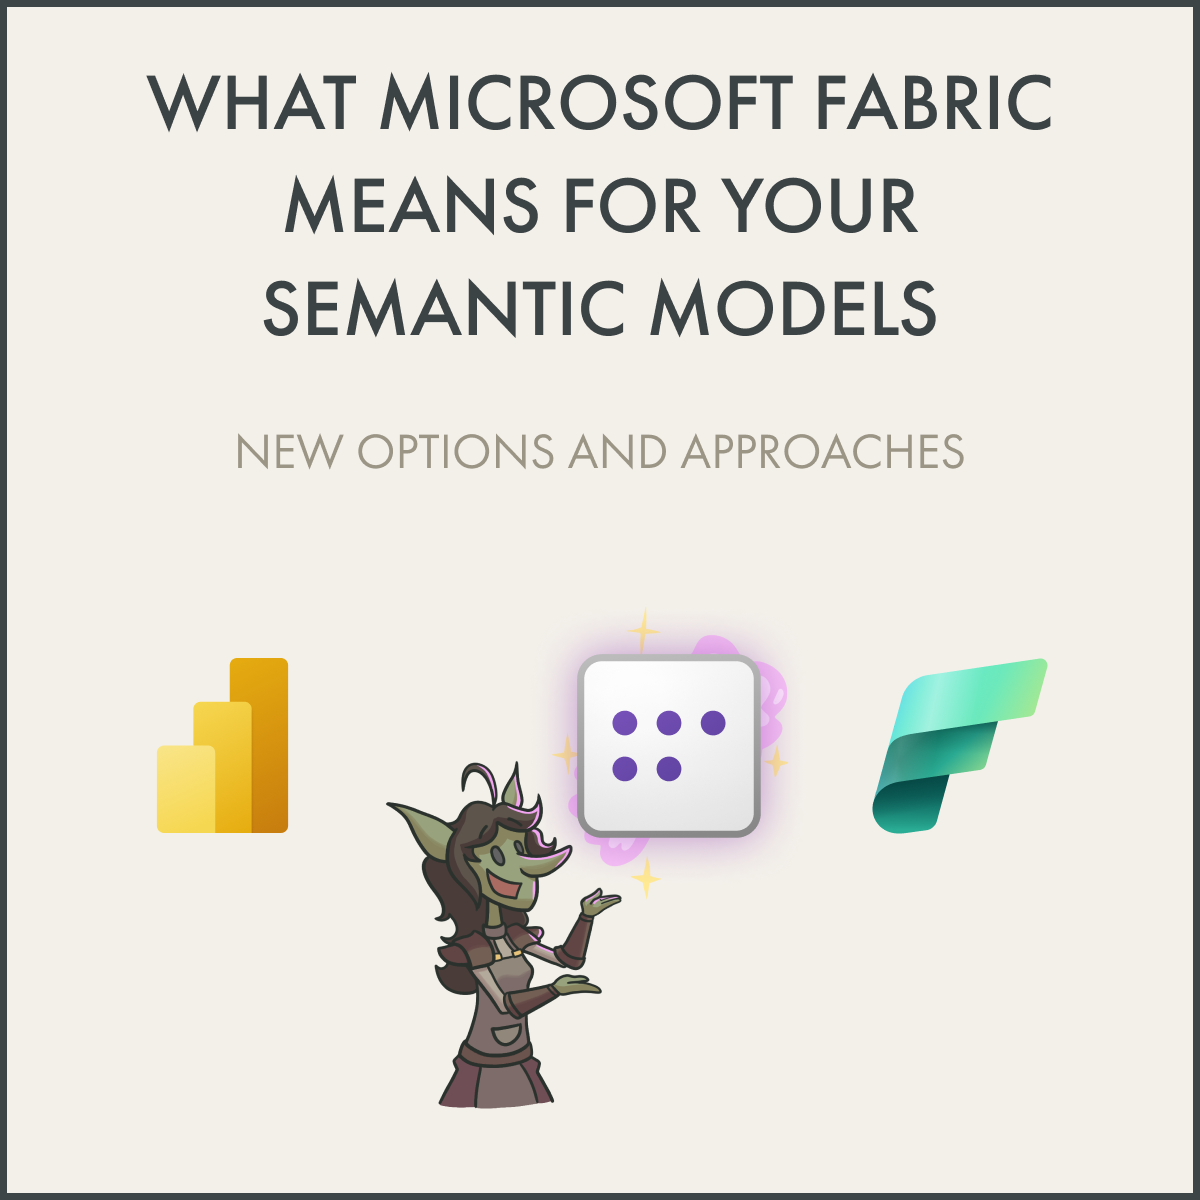 What Microsoft Fabric means for your semantic models: New options and approaches